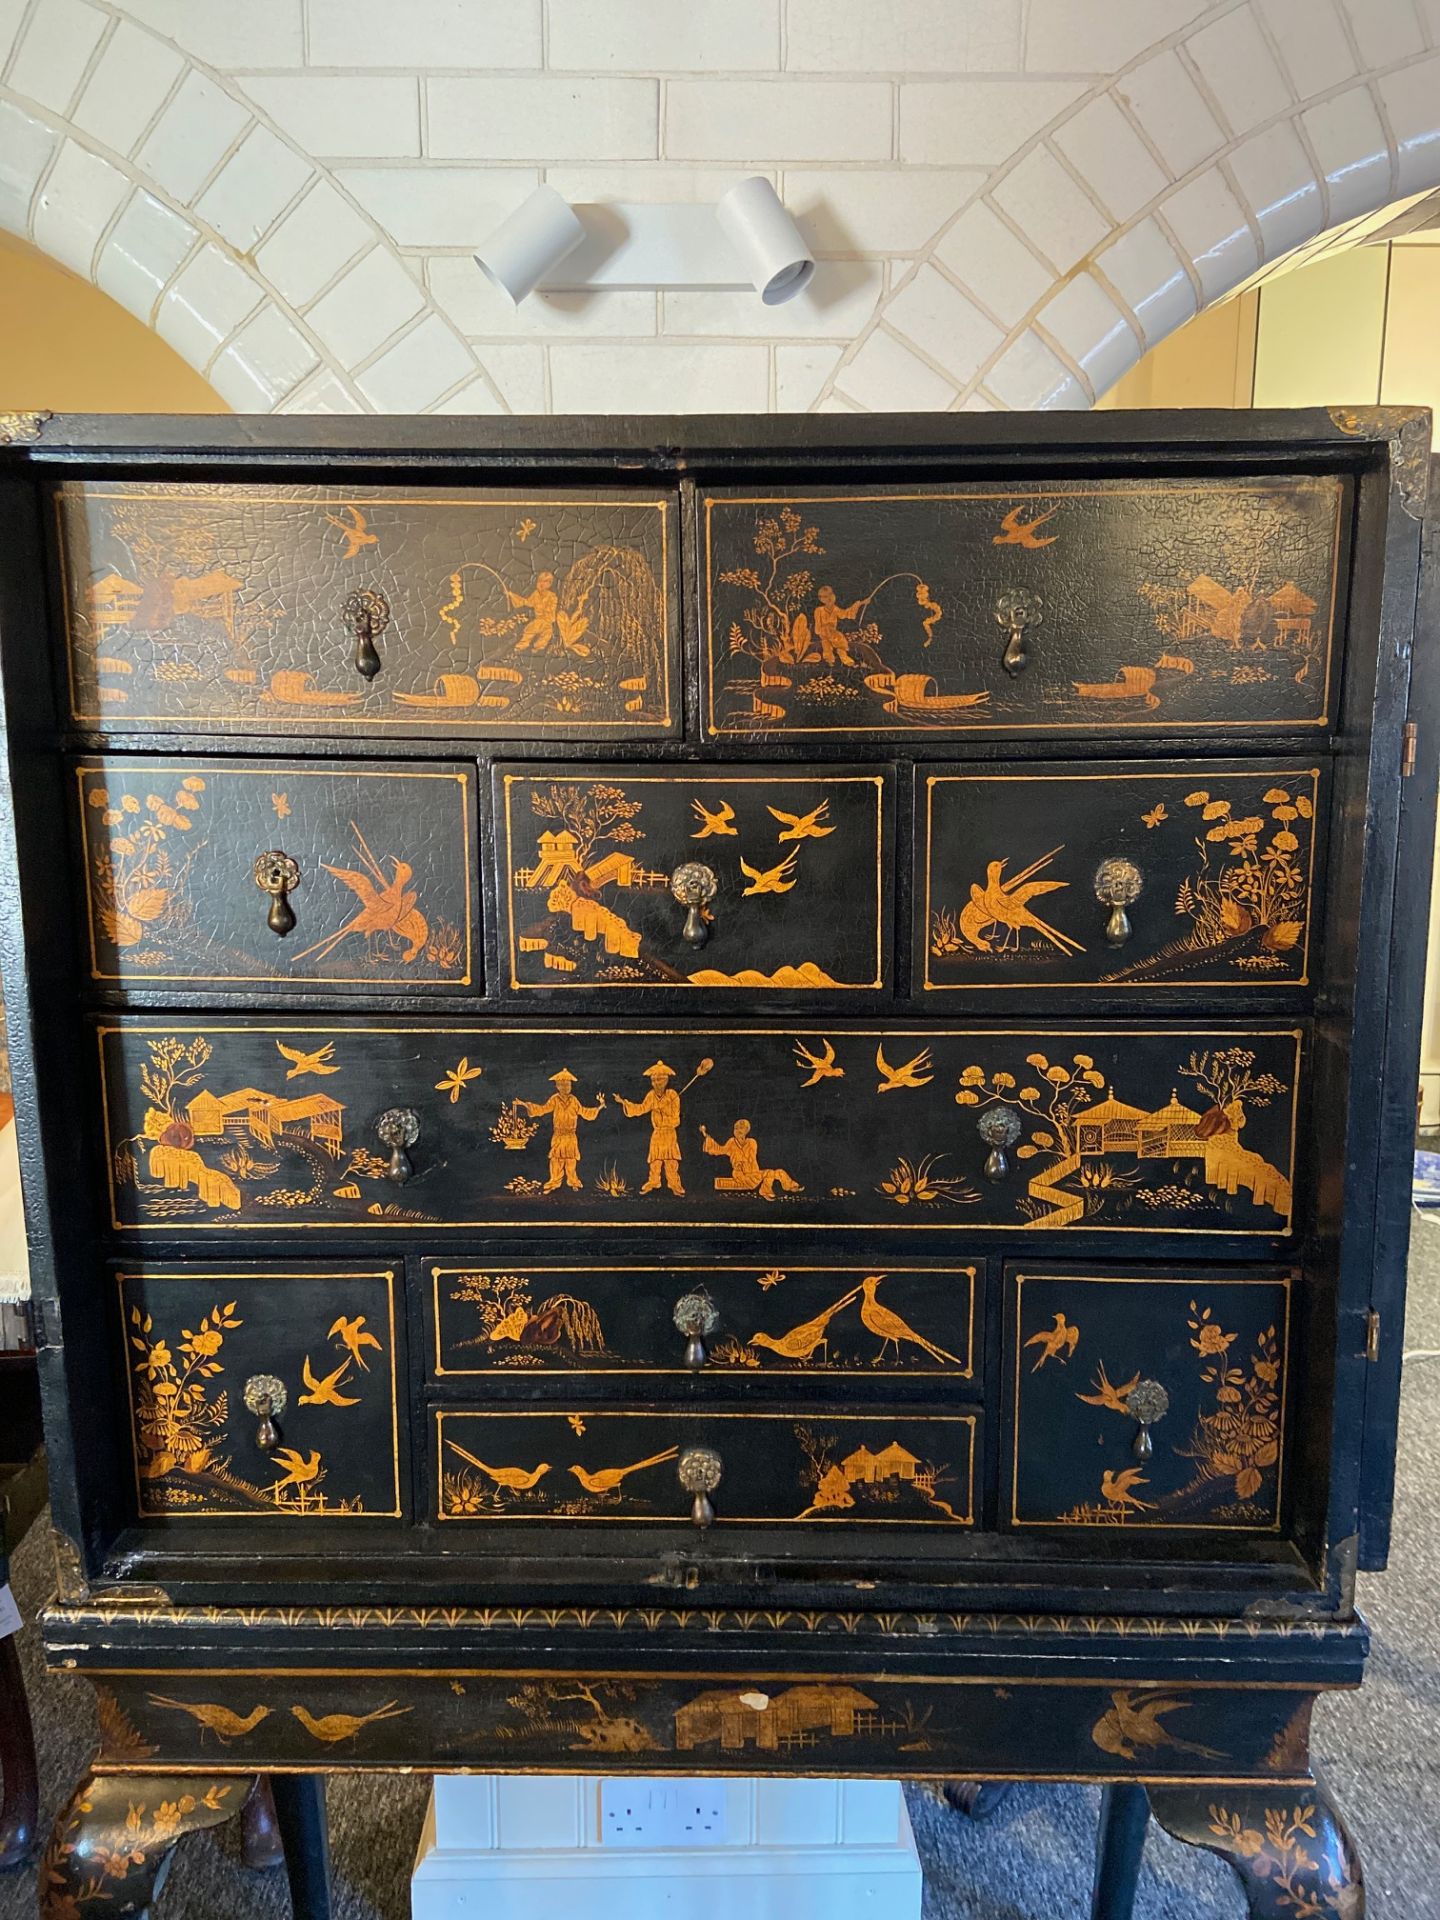 An early 18th century Chinese export black lacquer cabinet on a European stand - Image 27 of 36